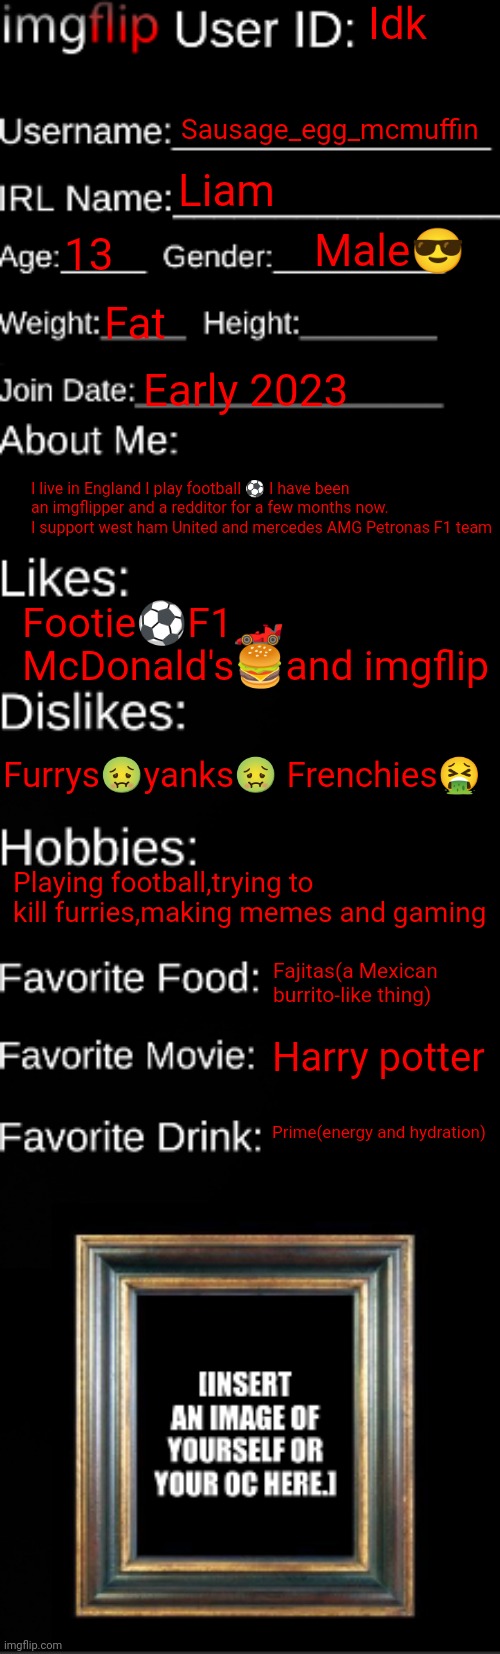 You now know the info about the (not) famous imgflipper | Idk; Sausage_egg_mcmuffin; Liam; Male😎; 13; Fat; Early 2023; I live in England I play football ⚽ I have been an imgflipper and a redditor for a few months now. I support west ham United and mercedes AMG Petronas F1 team; Footie⚽F1🏎️ McDonald's🍔and imgflip; Furrys🤢yanks🤢 Frenchies🤮; Playing football,trying to kill furries,making memes and gaming; Fajitas(a Mexican burrito-like thing); Harry potter; Prime(energy and hydration) | image tagged in imgflip id card,bio | made w/ Imgflip meme maker